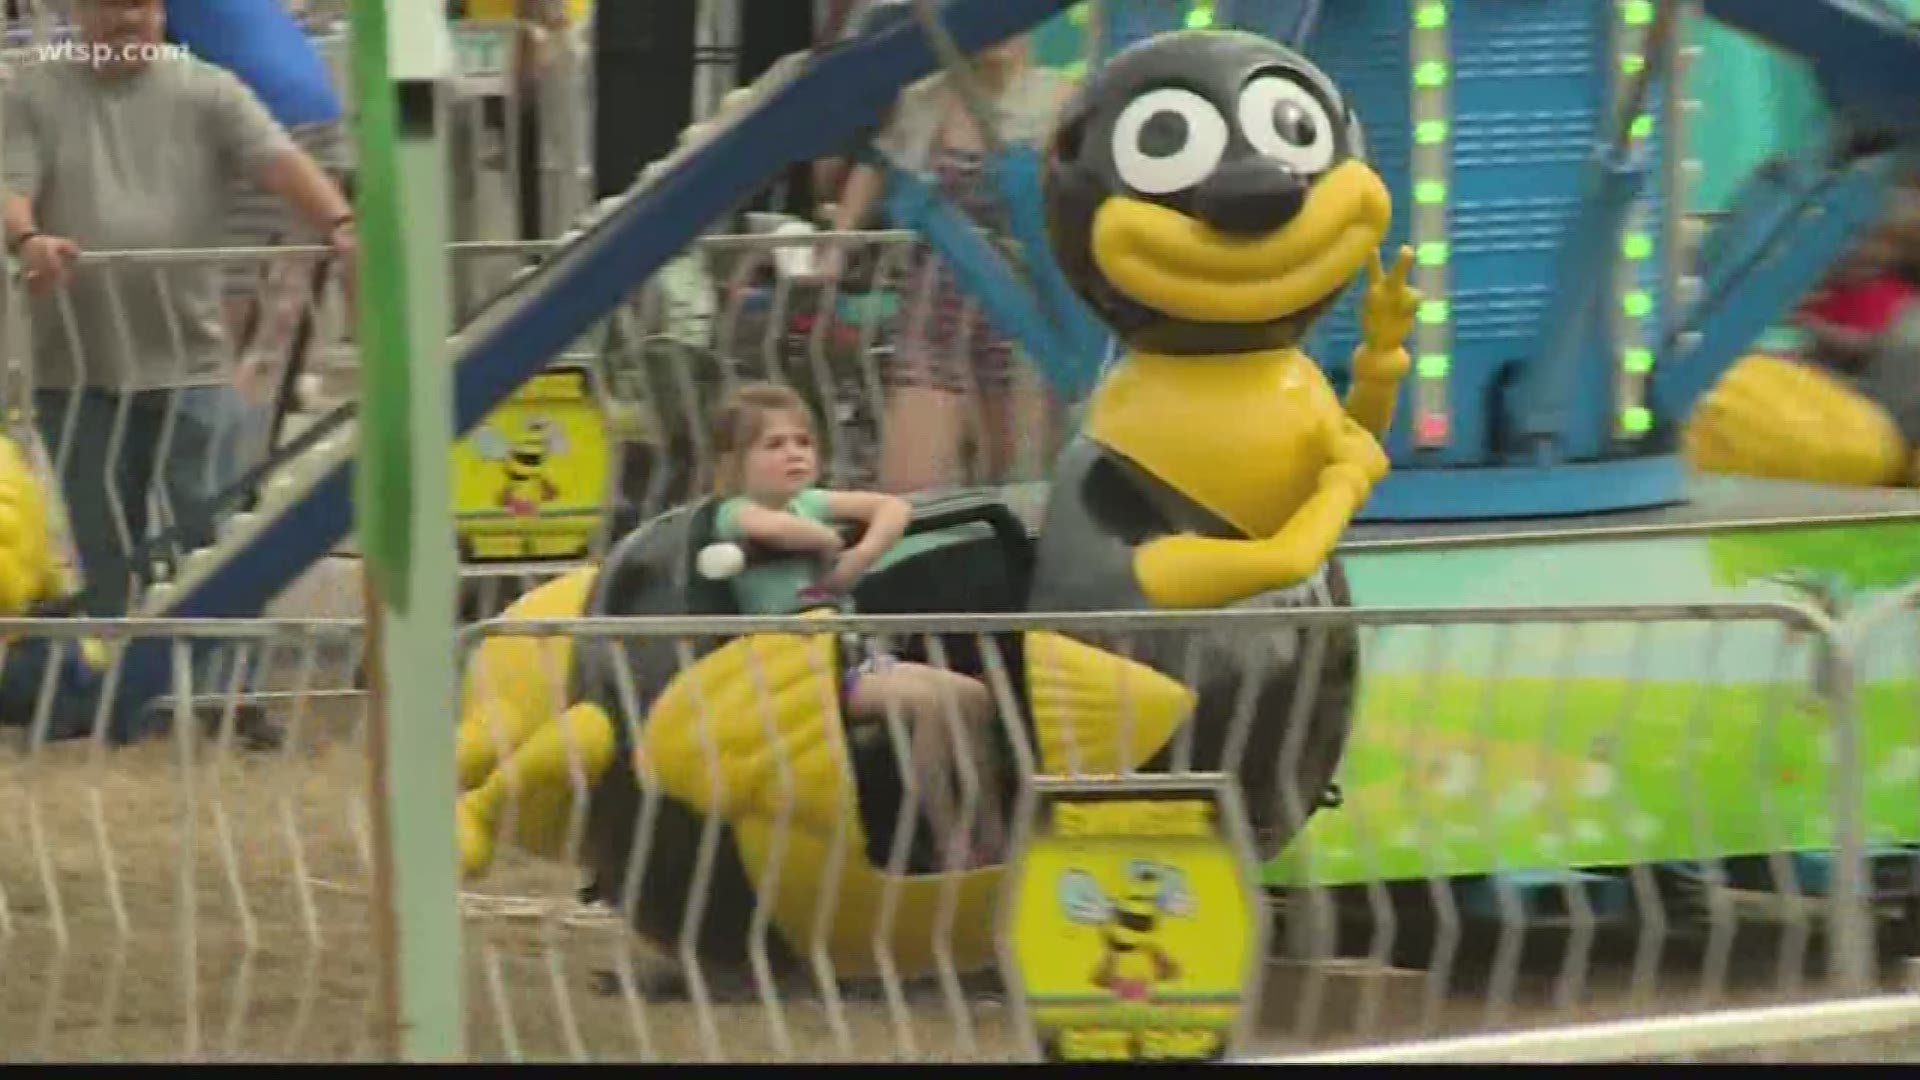 As the fair's first weekend comes to an end, the sheriff's office says crime is down from last year.